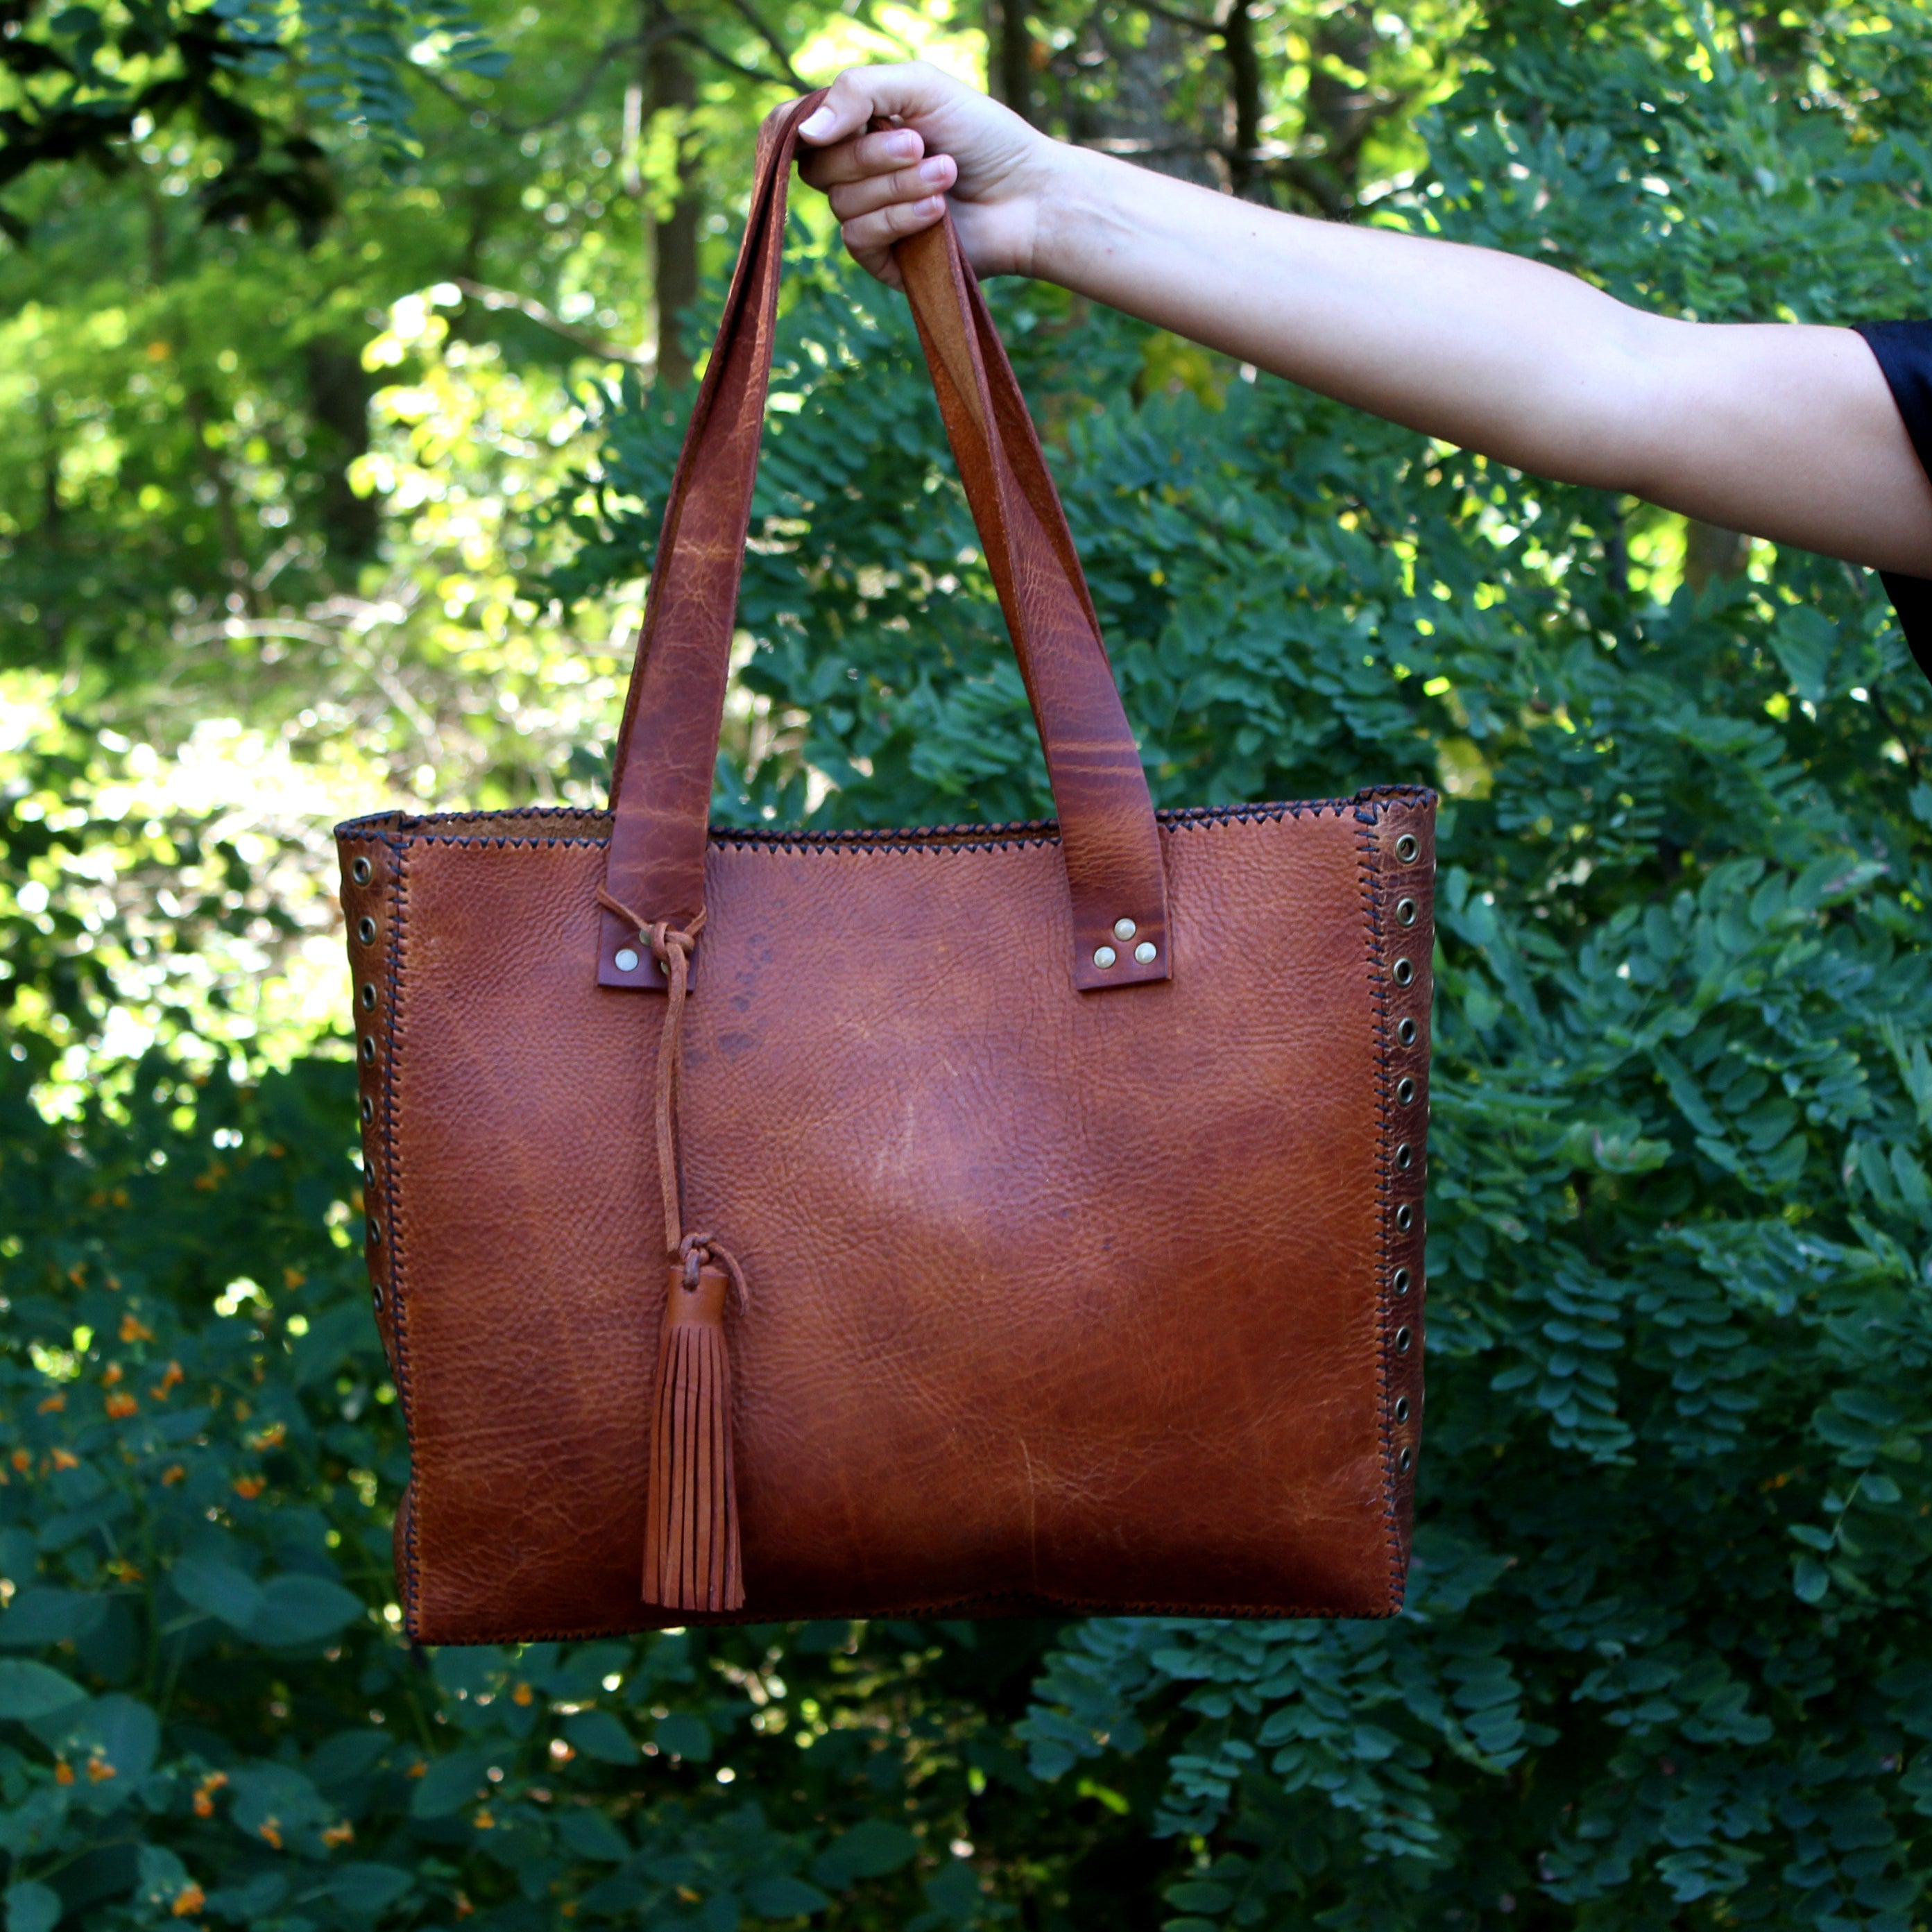 Handmade Leather Bags for Women @ The Leather Store